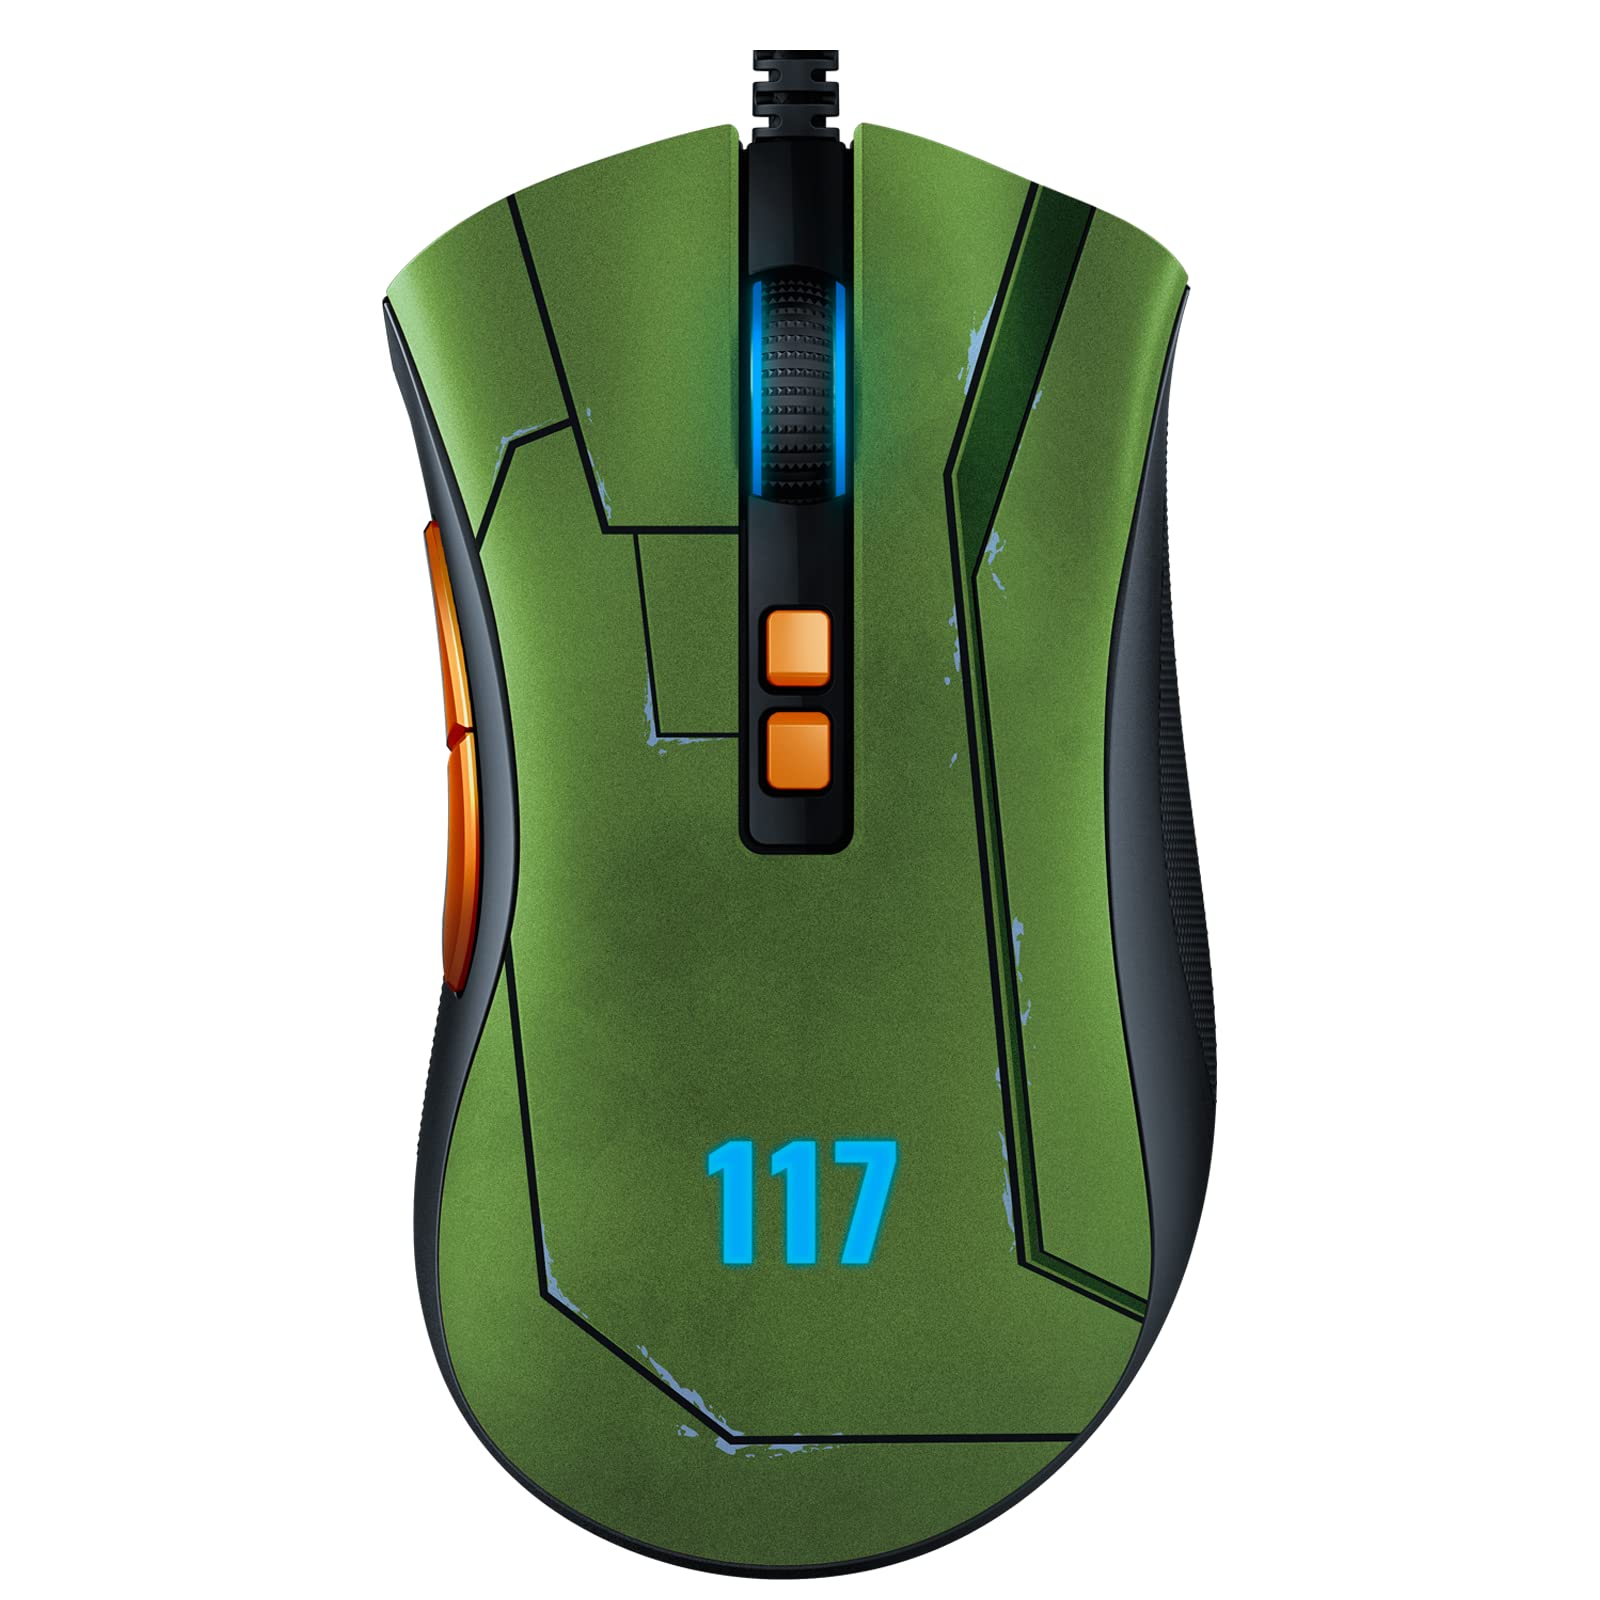 Razer DeathAdder V2 Gaming Mouse (Halo Infinite Edition) $39.99 + Free Shipping